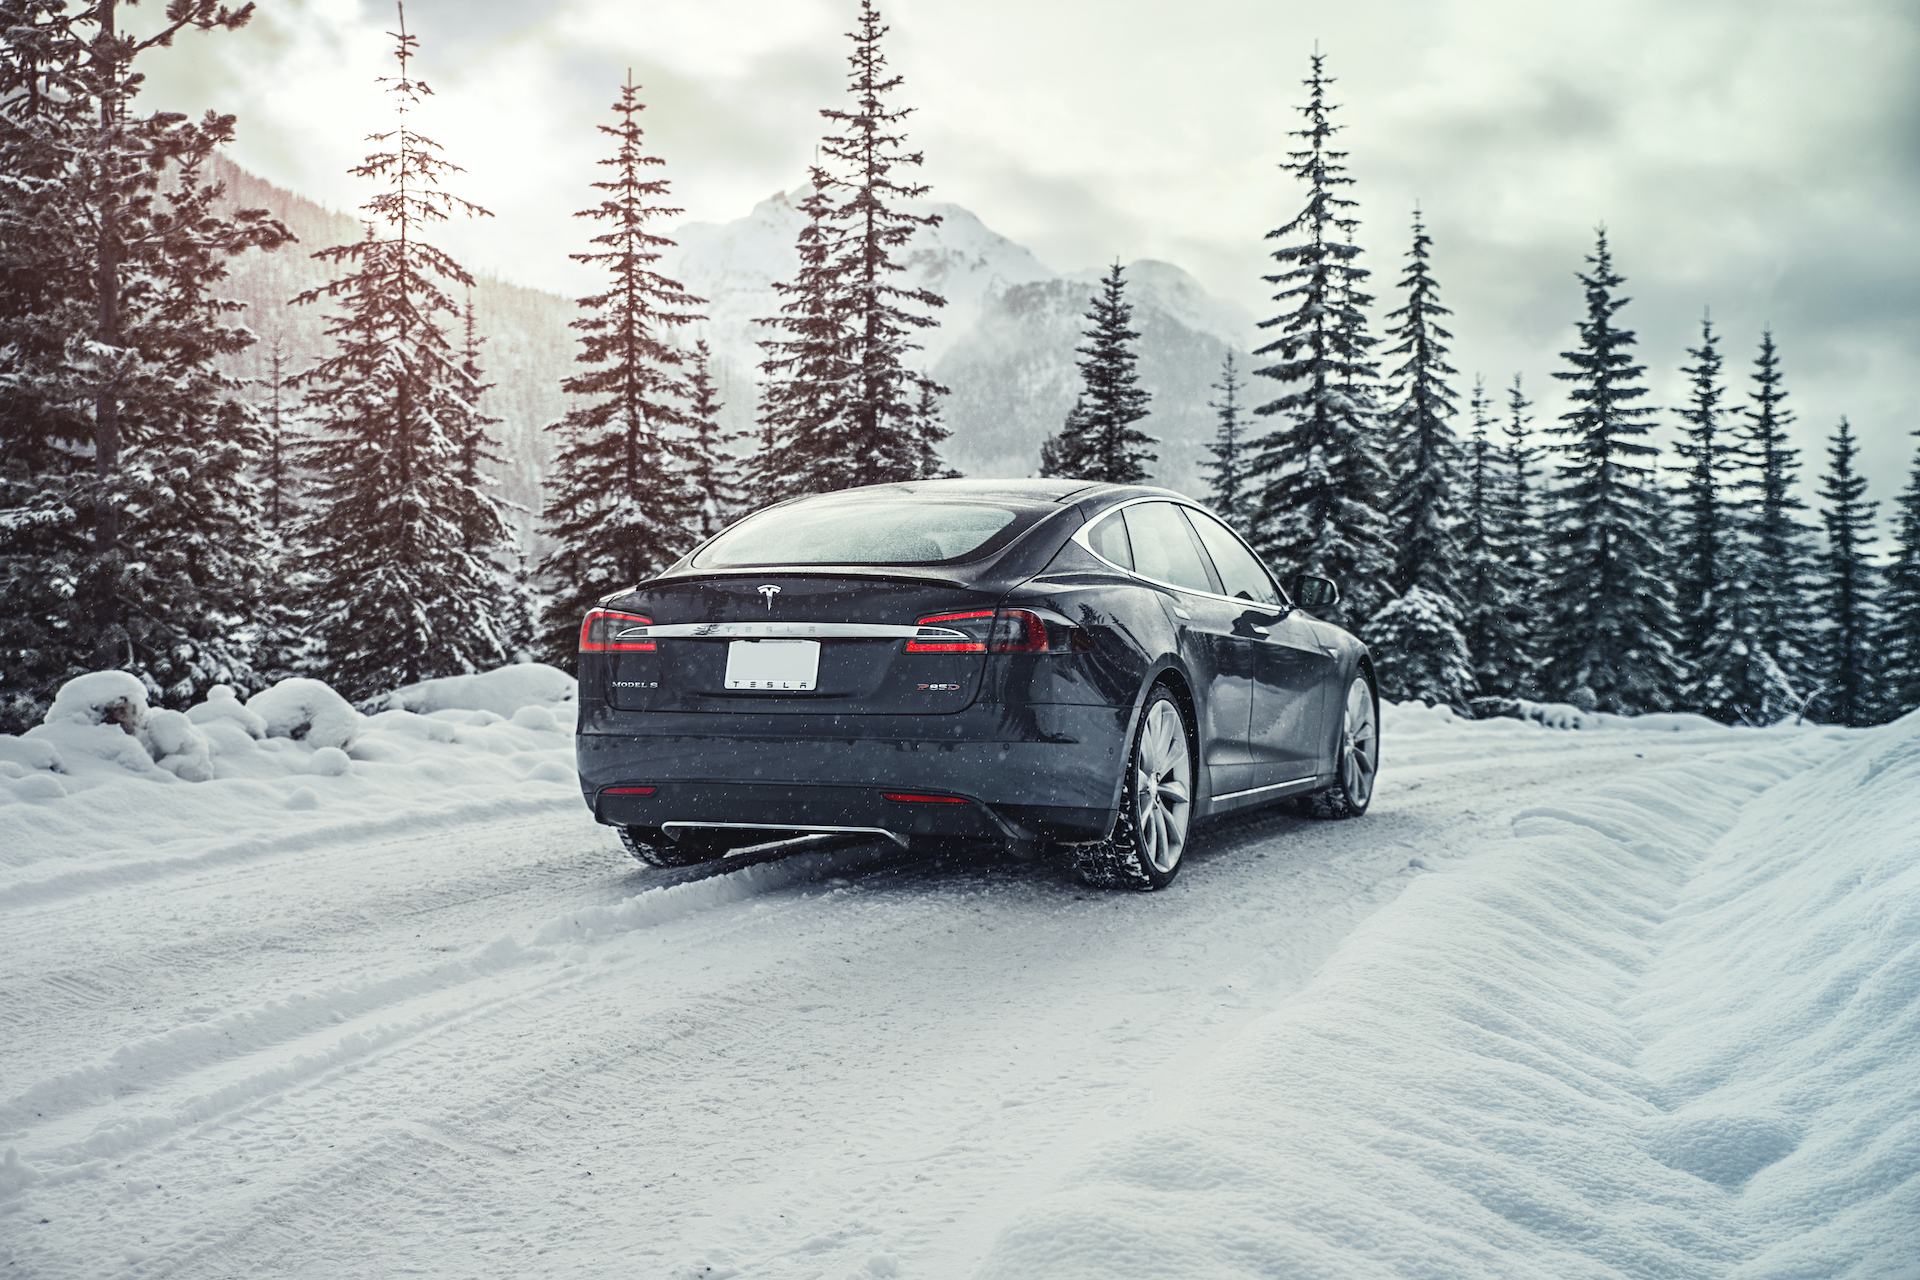 The Tesla Model S Performance offers a 2.3-second 0-60 time and over 350 miles of available range.